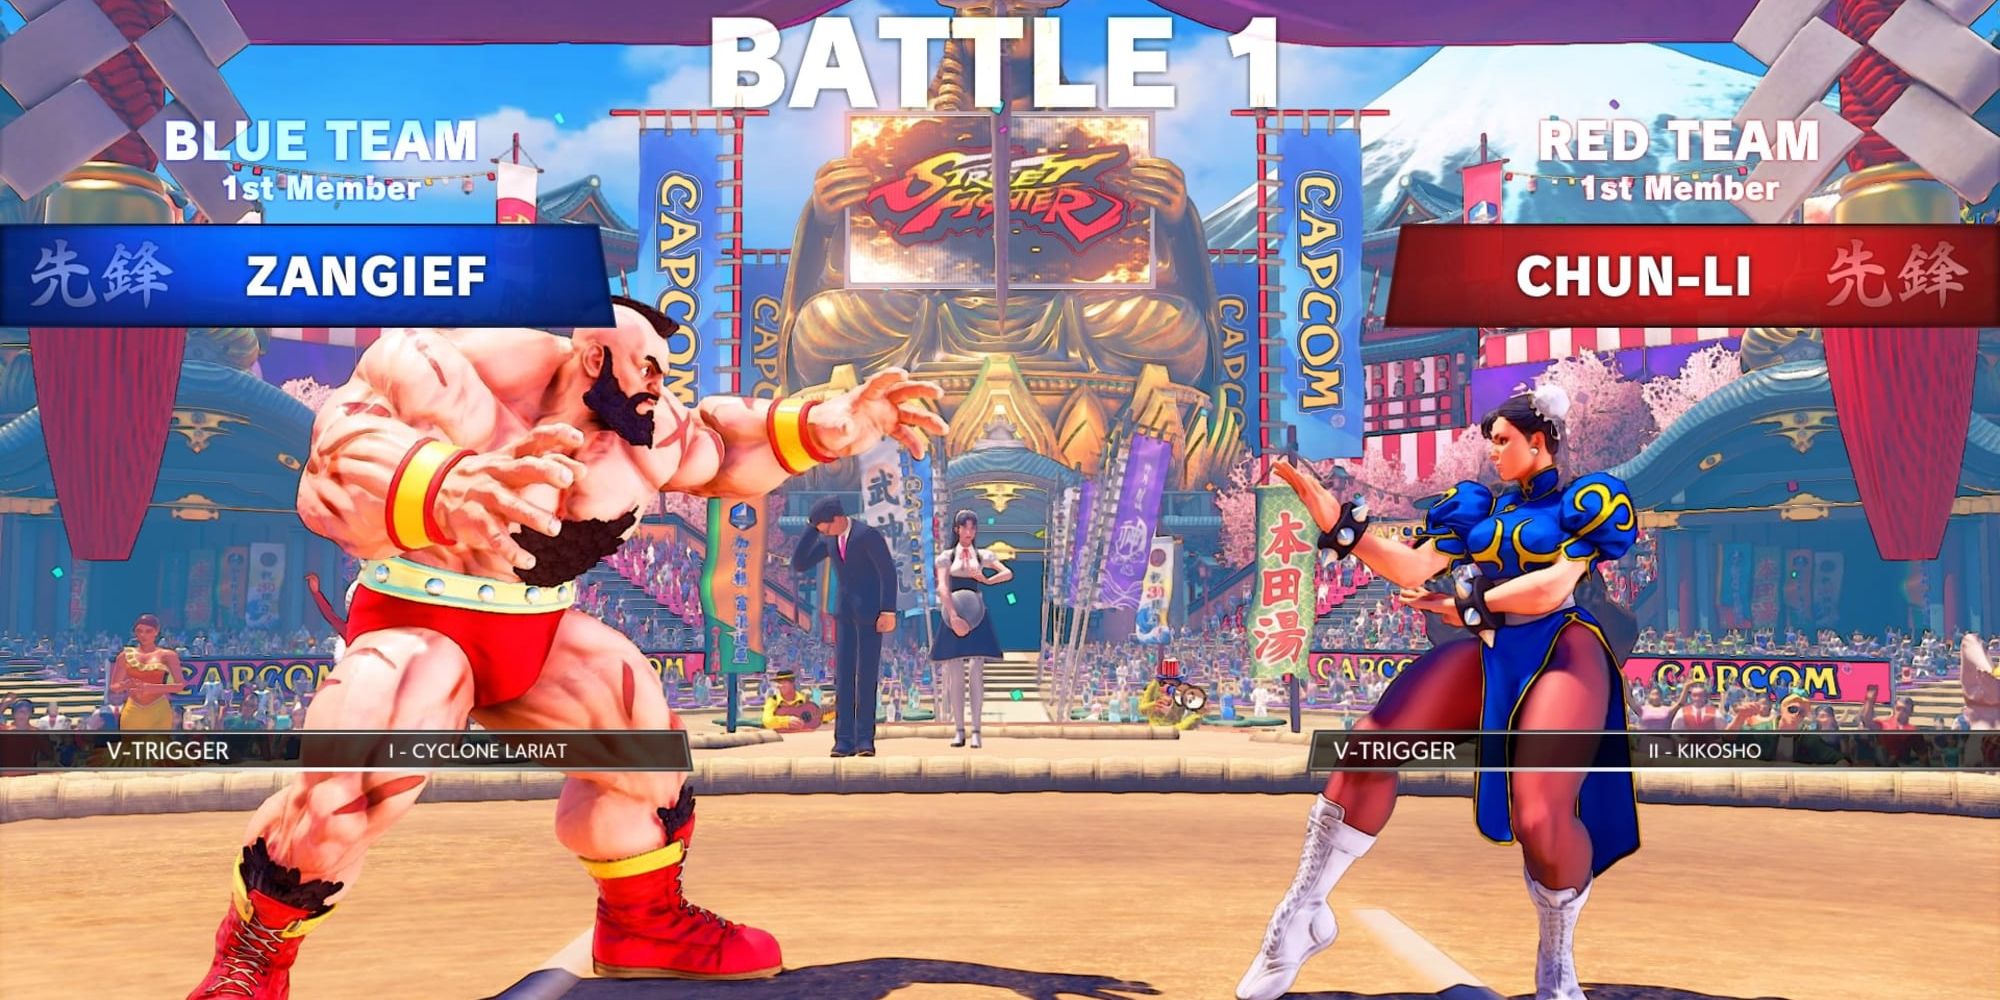 Zangief and Chun Li representing their teams in Team Battle in Street Fighter V